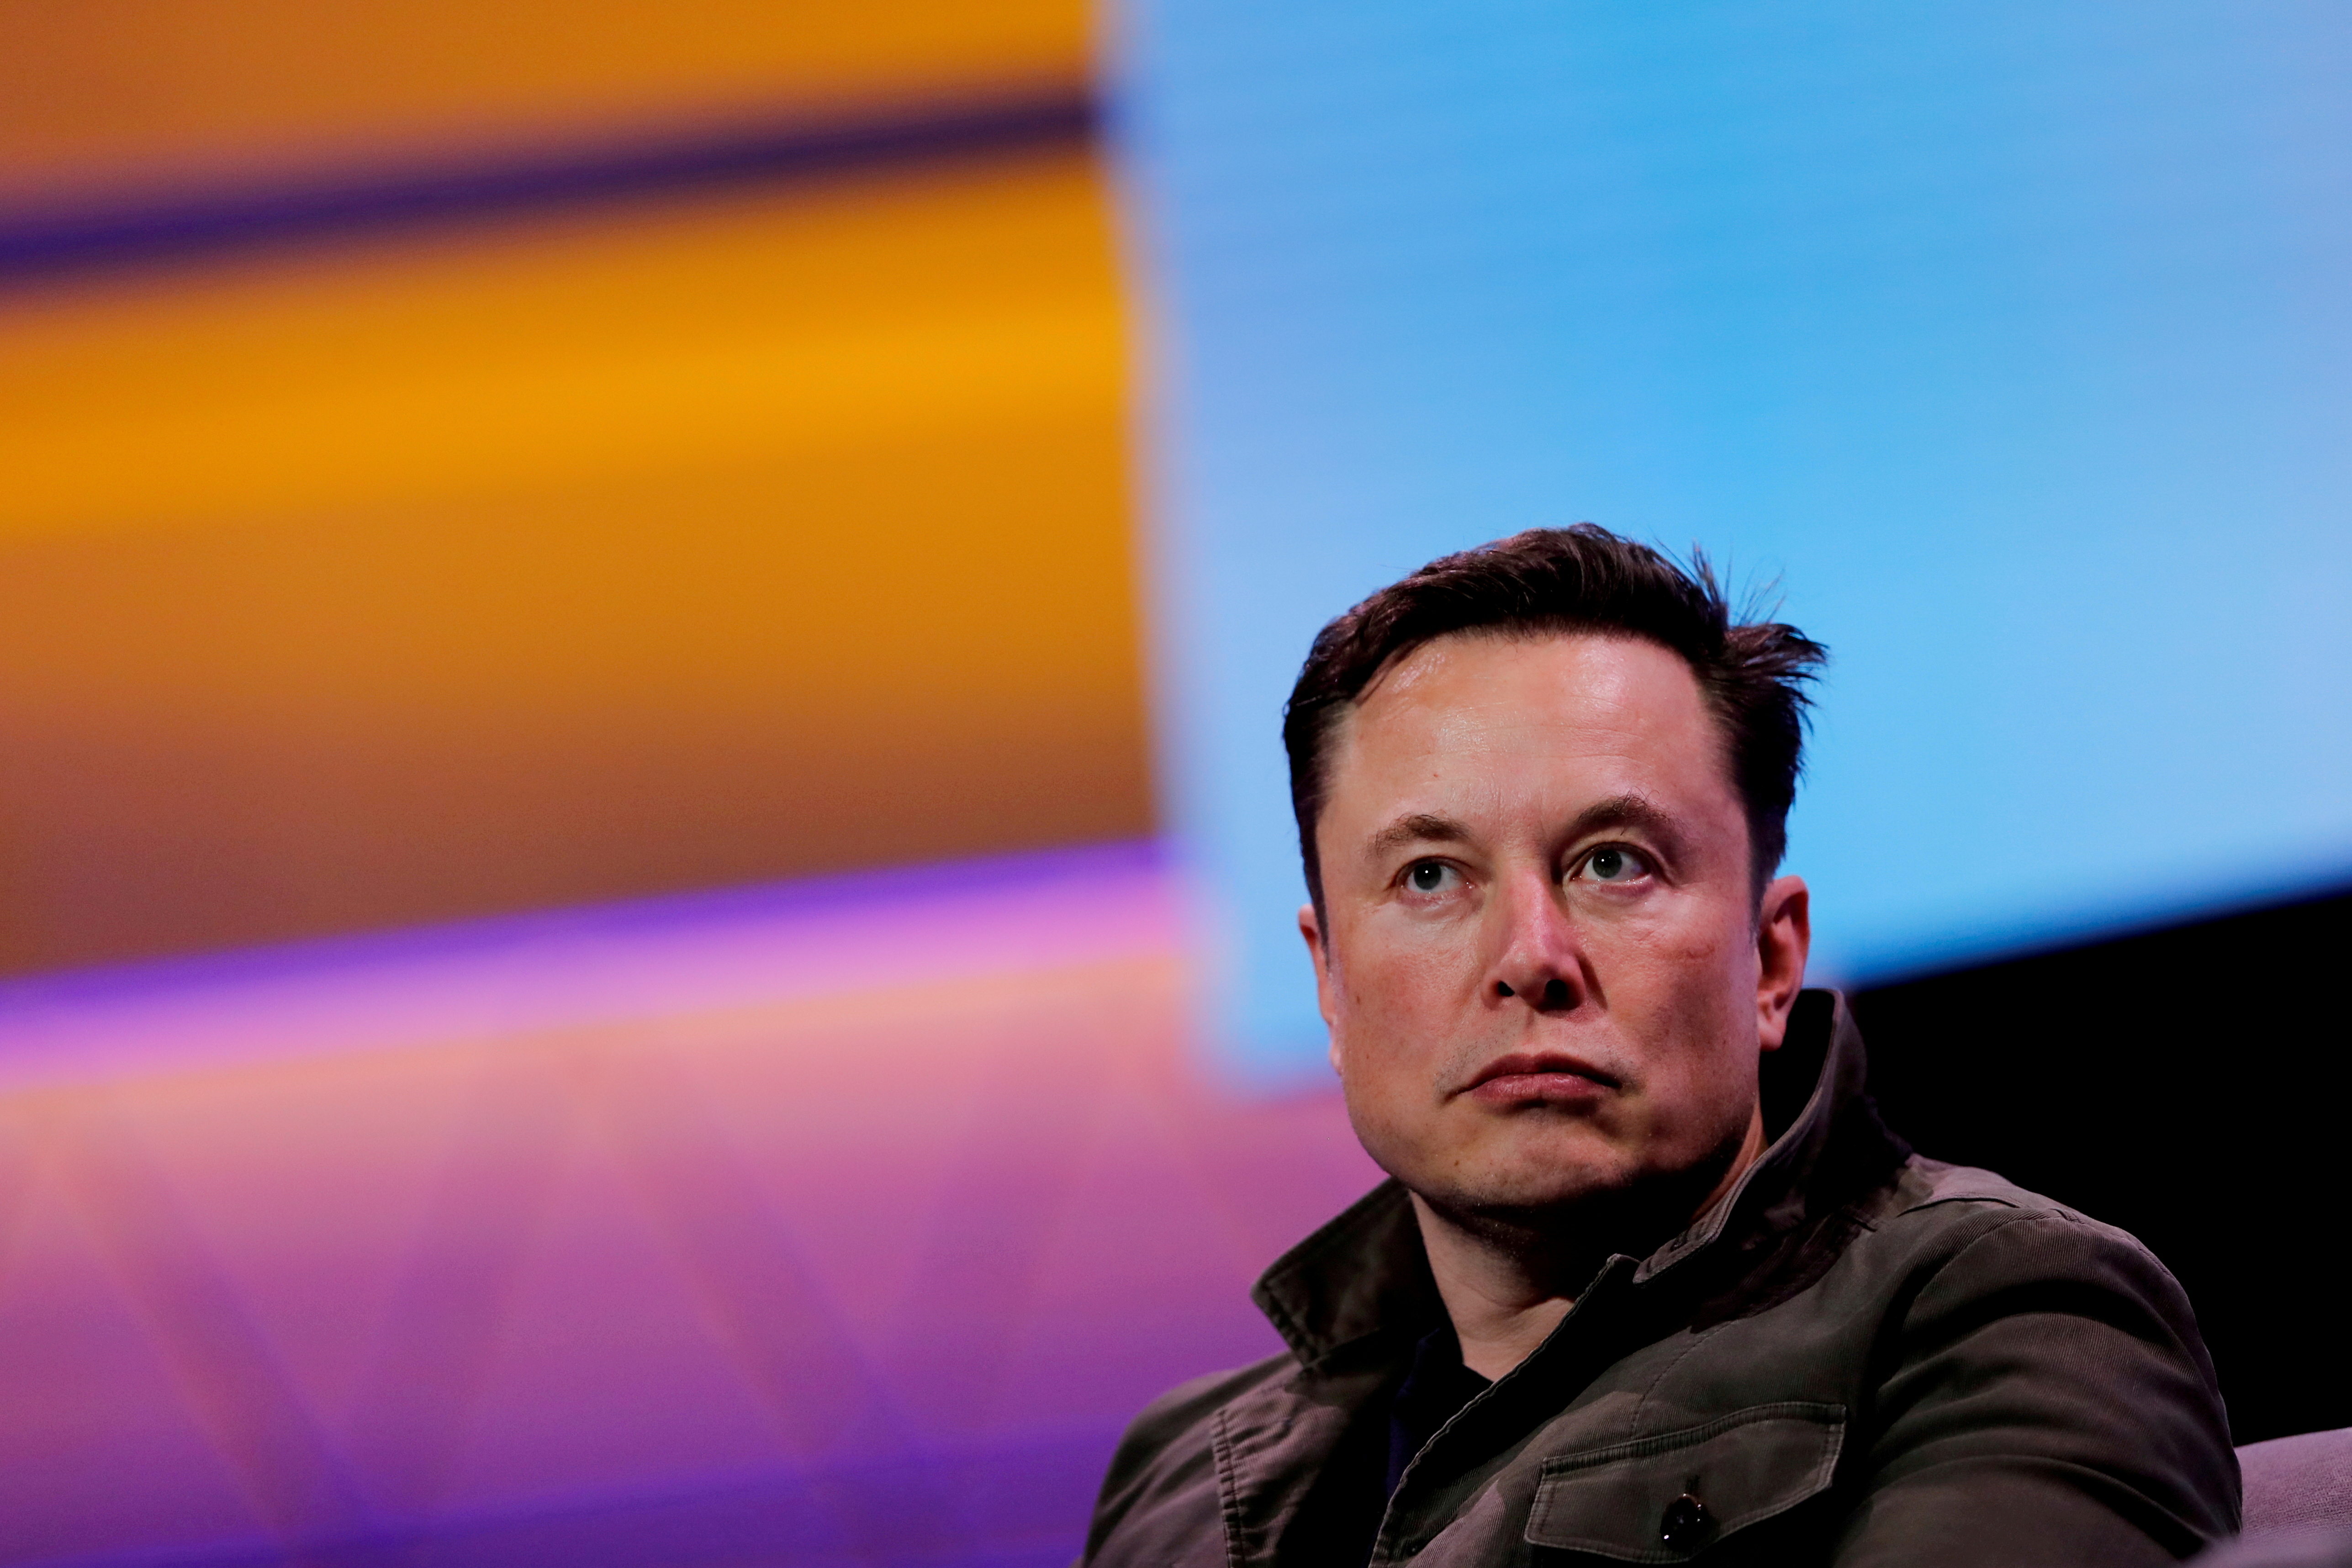 SpaceX owner and Tesla CEO Elon Musk will show up in São Paulo and meet Brazilian President Jair Bolsonaro (Reuters)